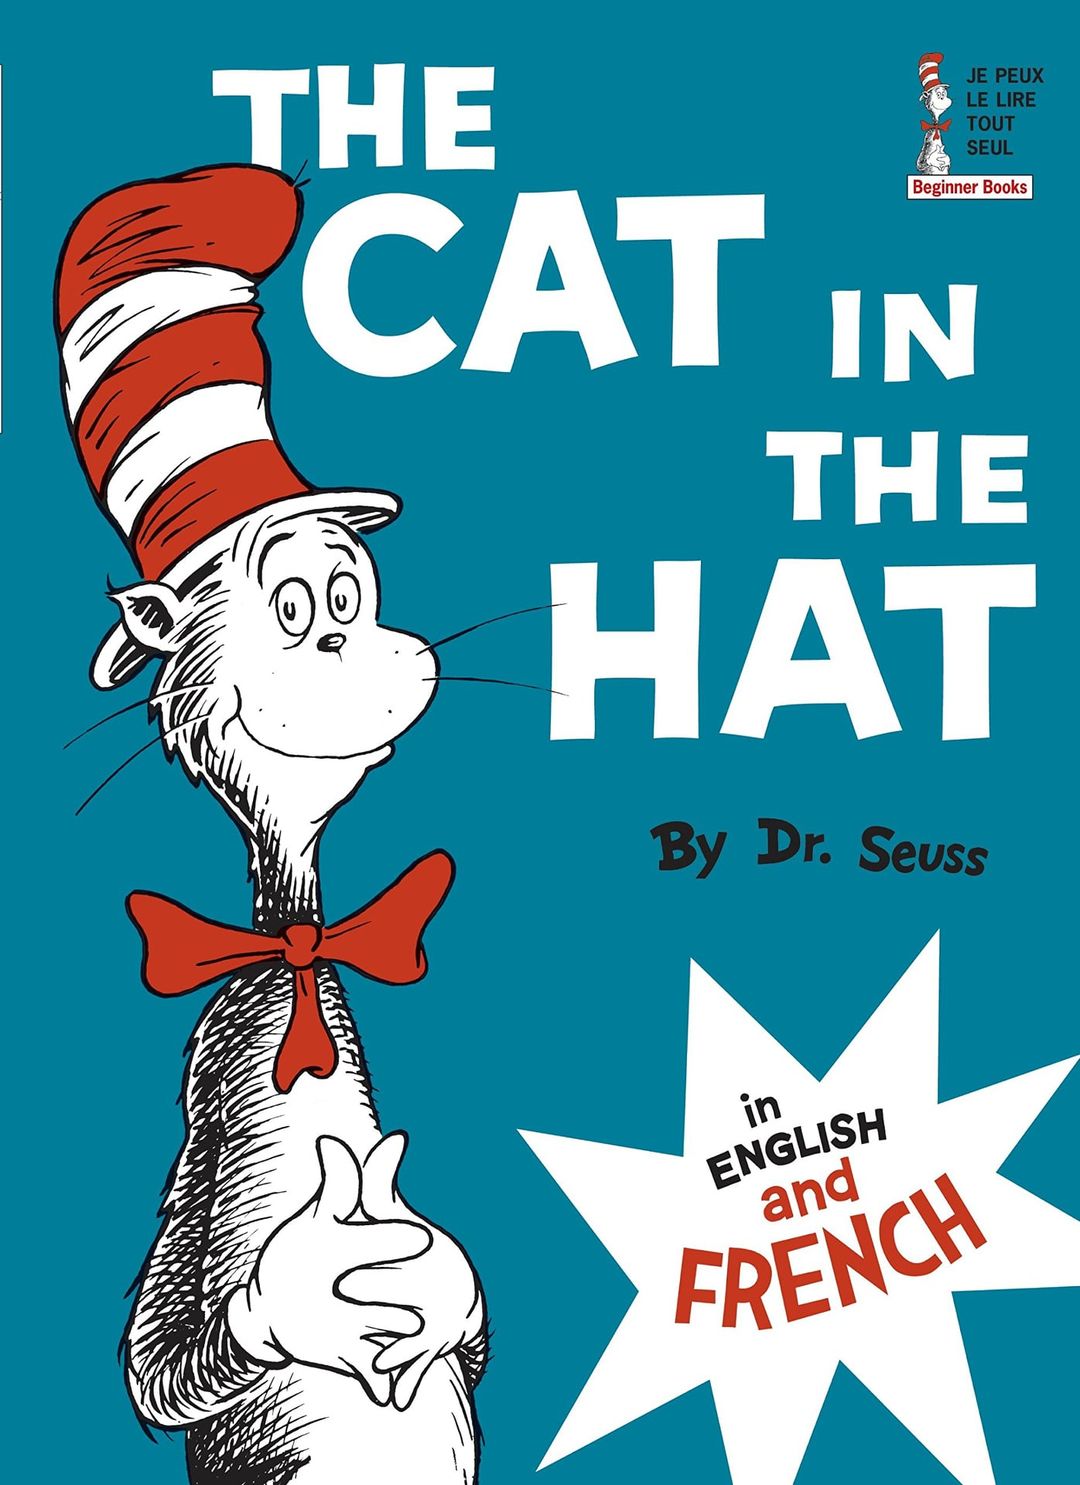 livre : the cat in the hat